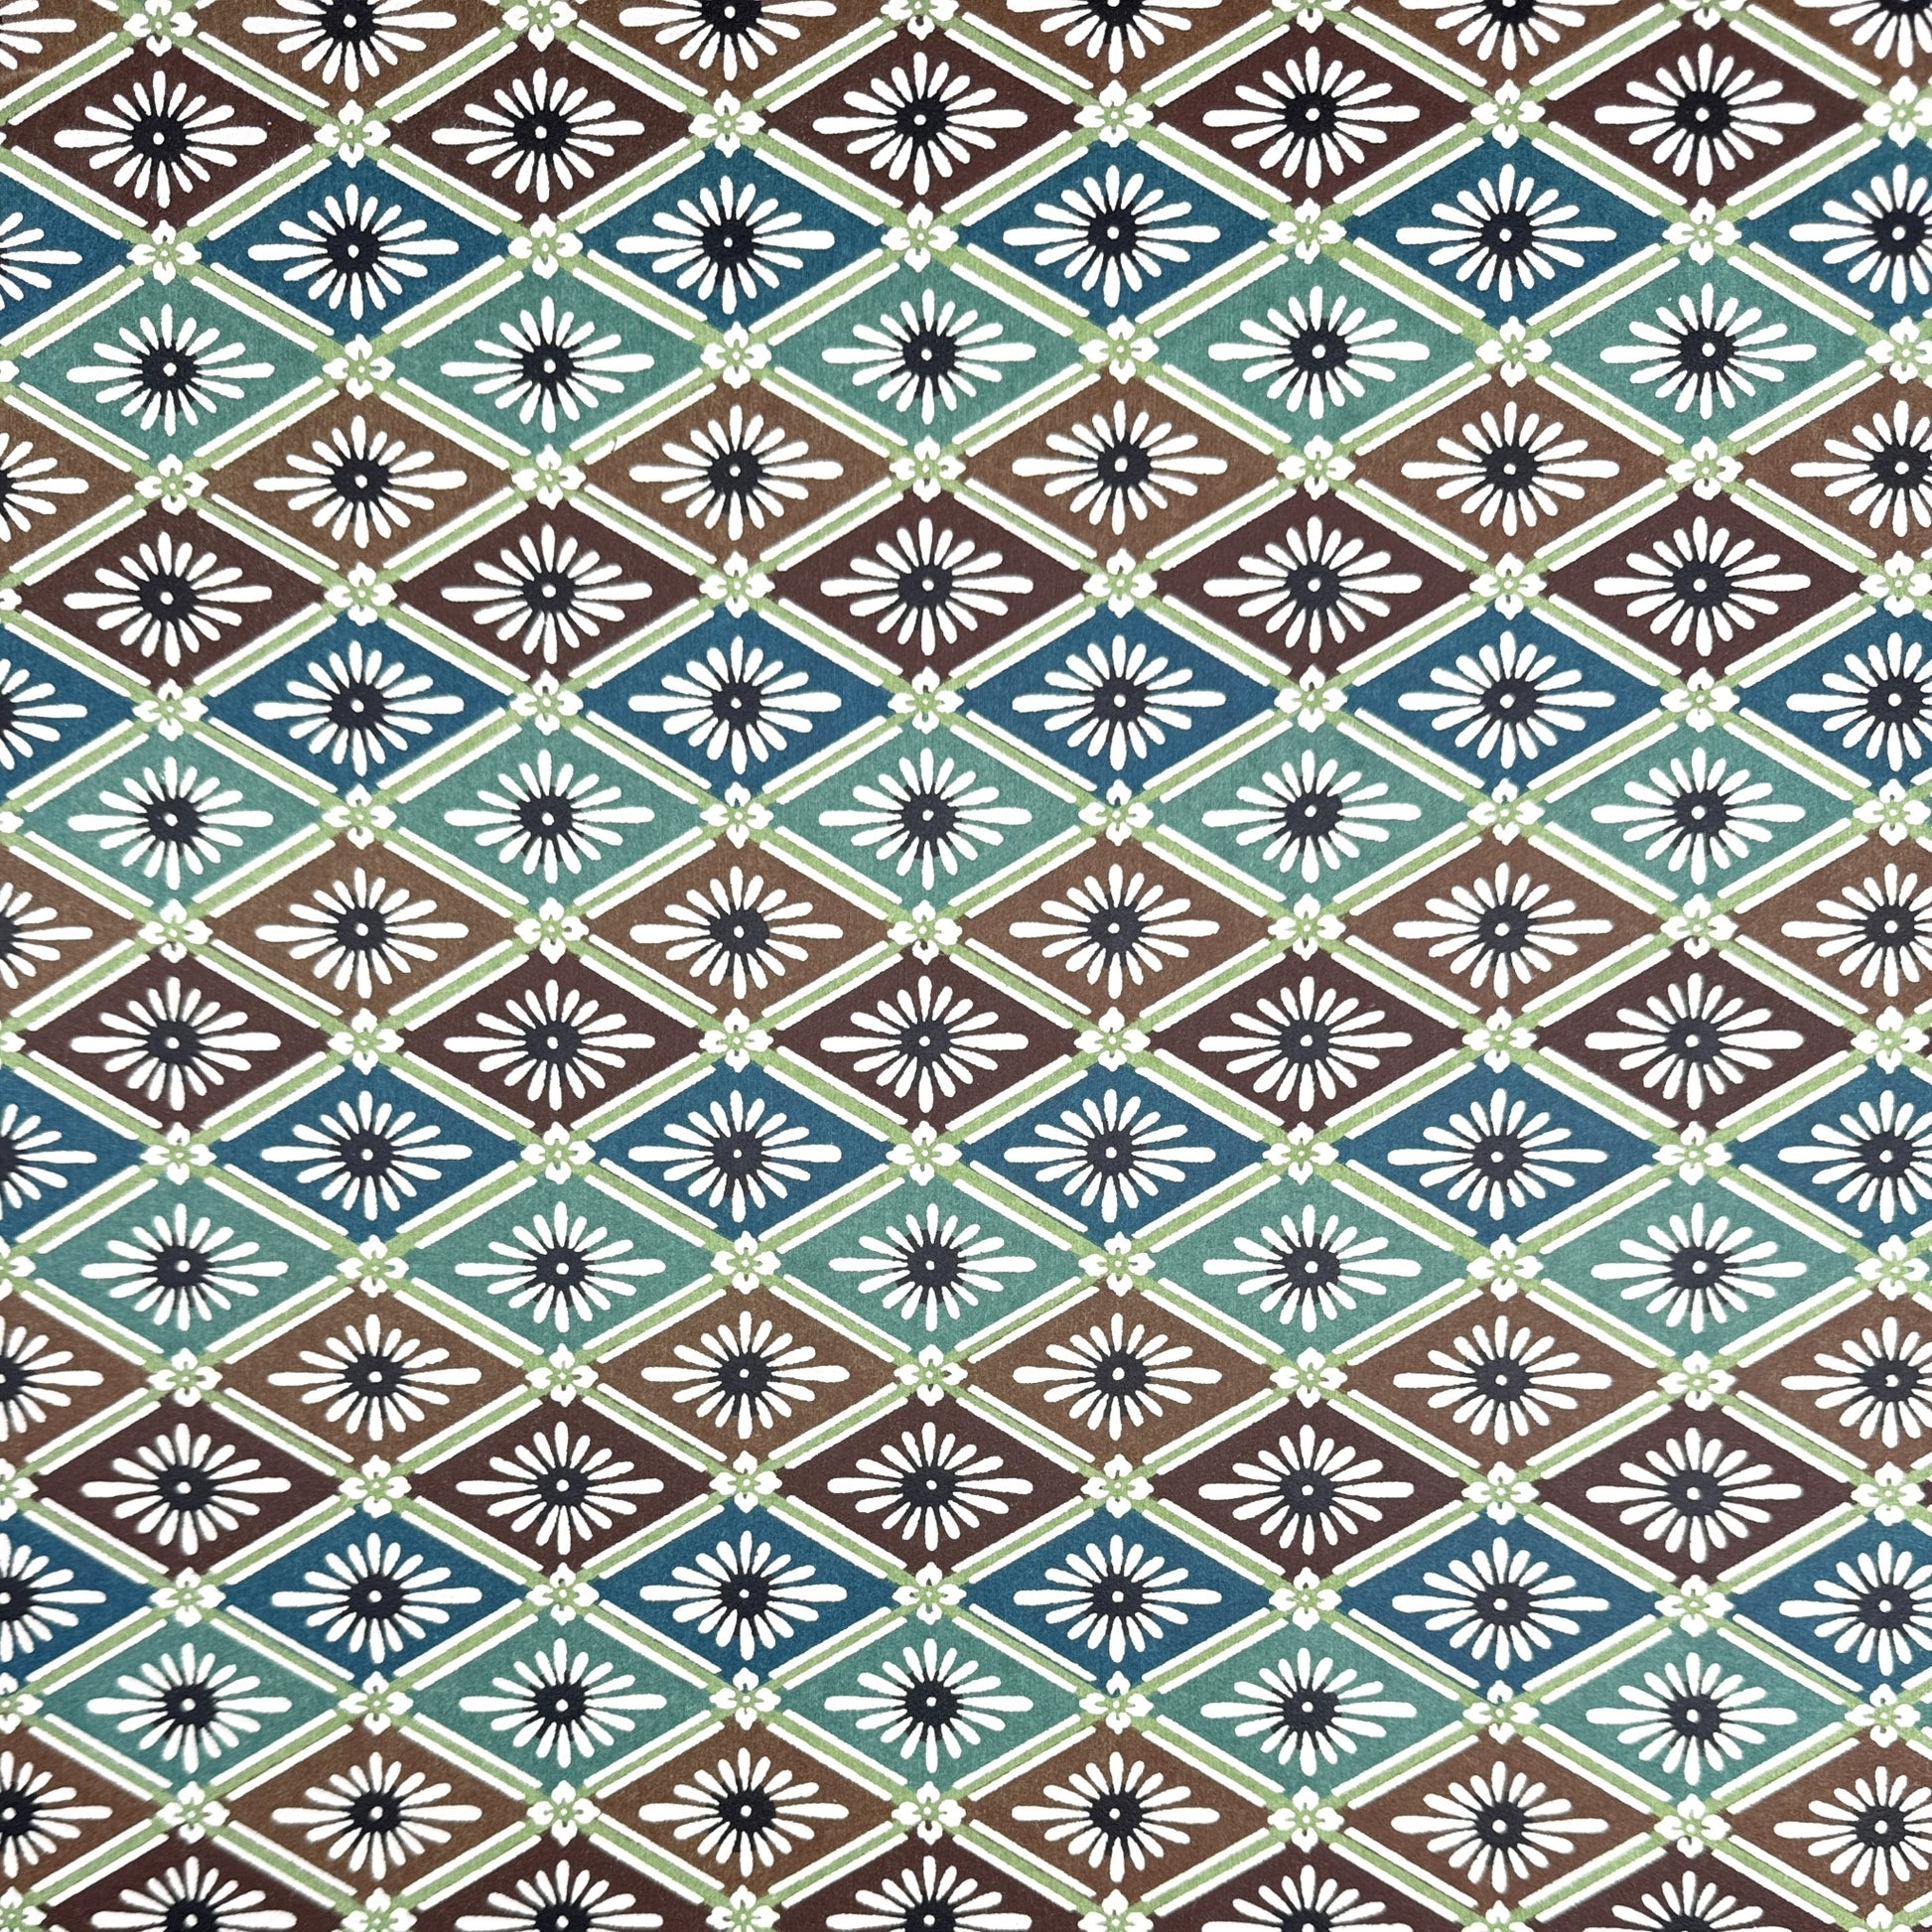 A Japanese stencil-dyed patterned paper with a repeat pattern of floral diamonds in tones of blue, aqua, brown and white.